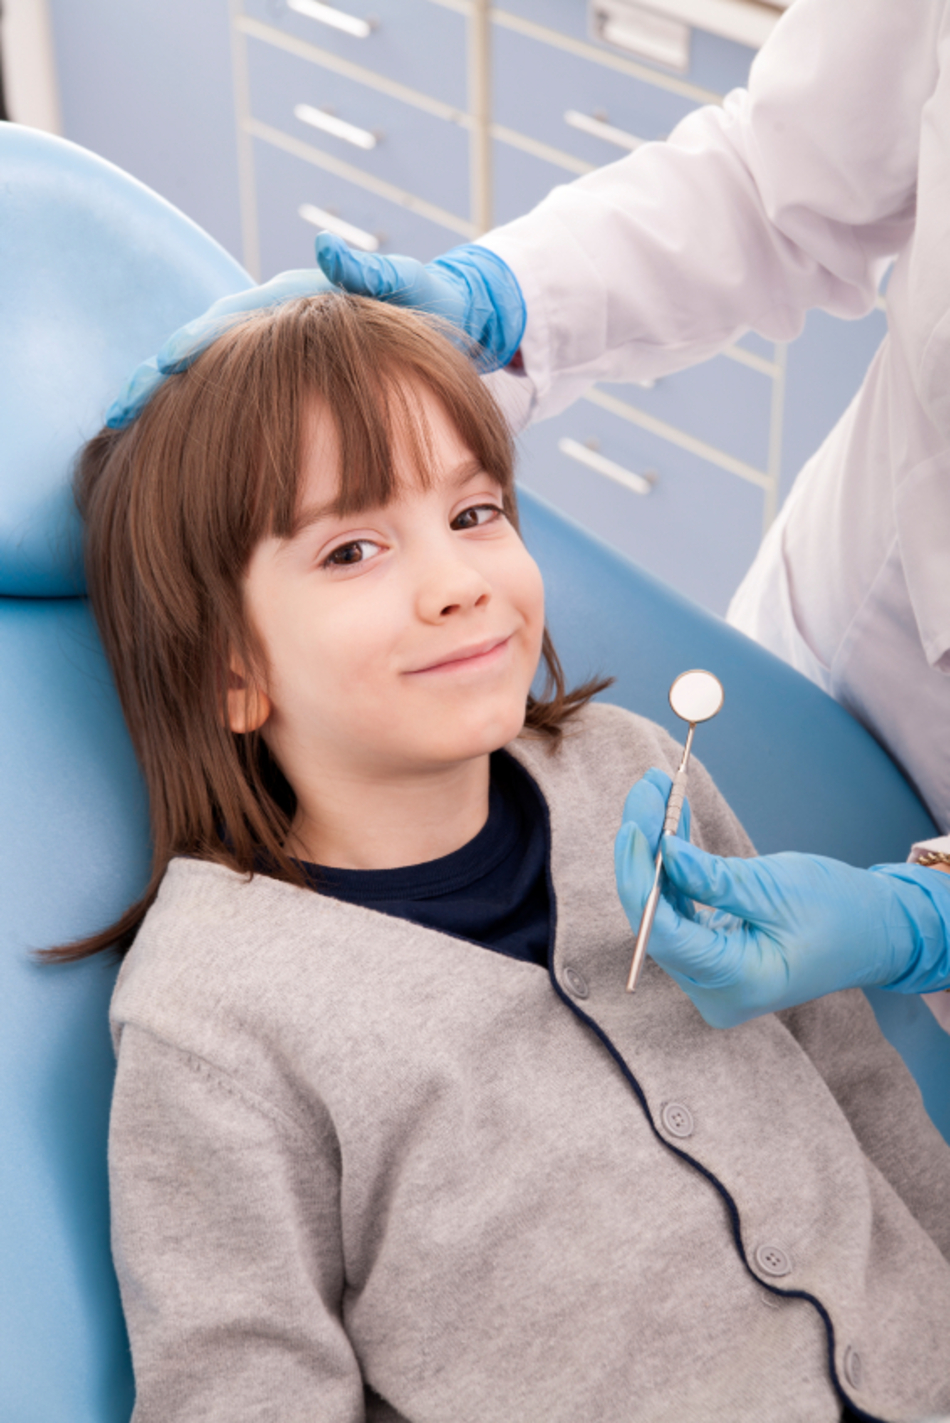 Tips to Make Dentist Visits Easier for Children with Autism